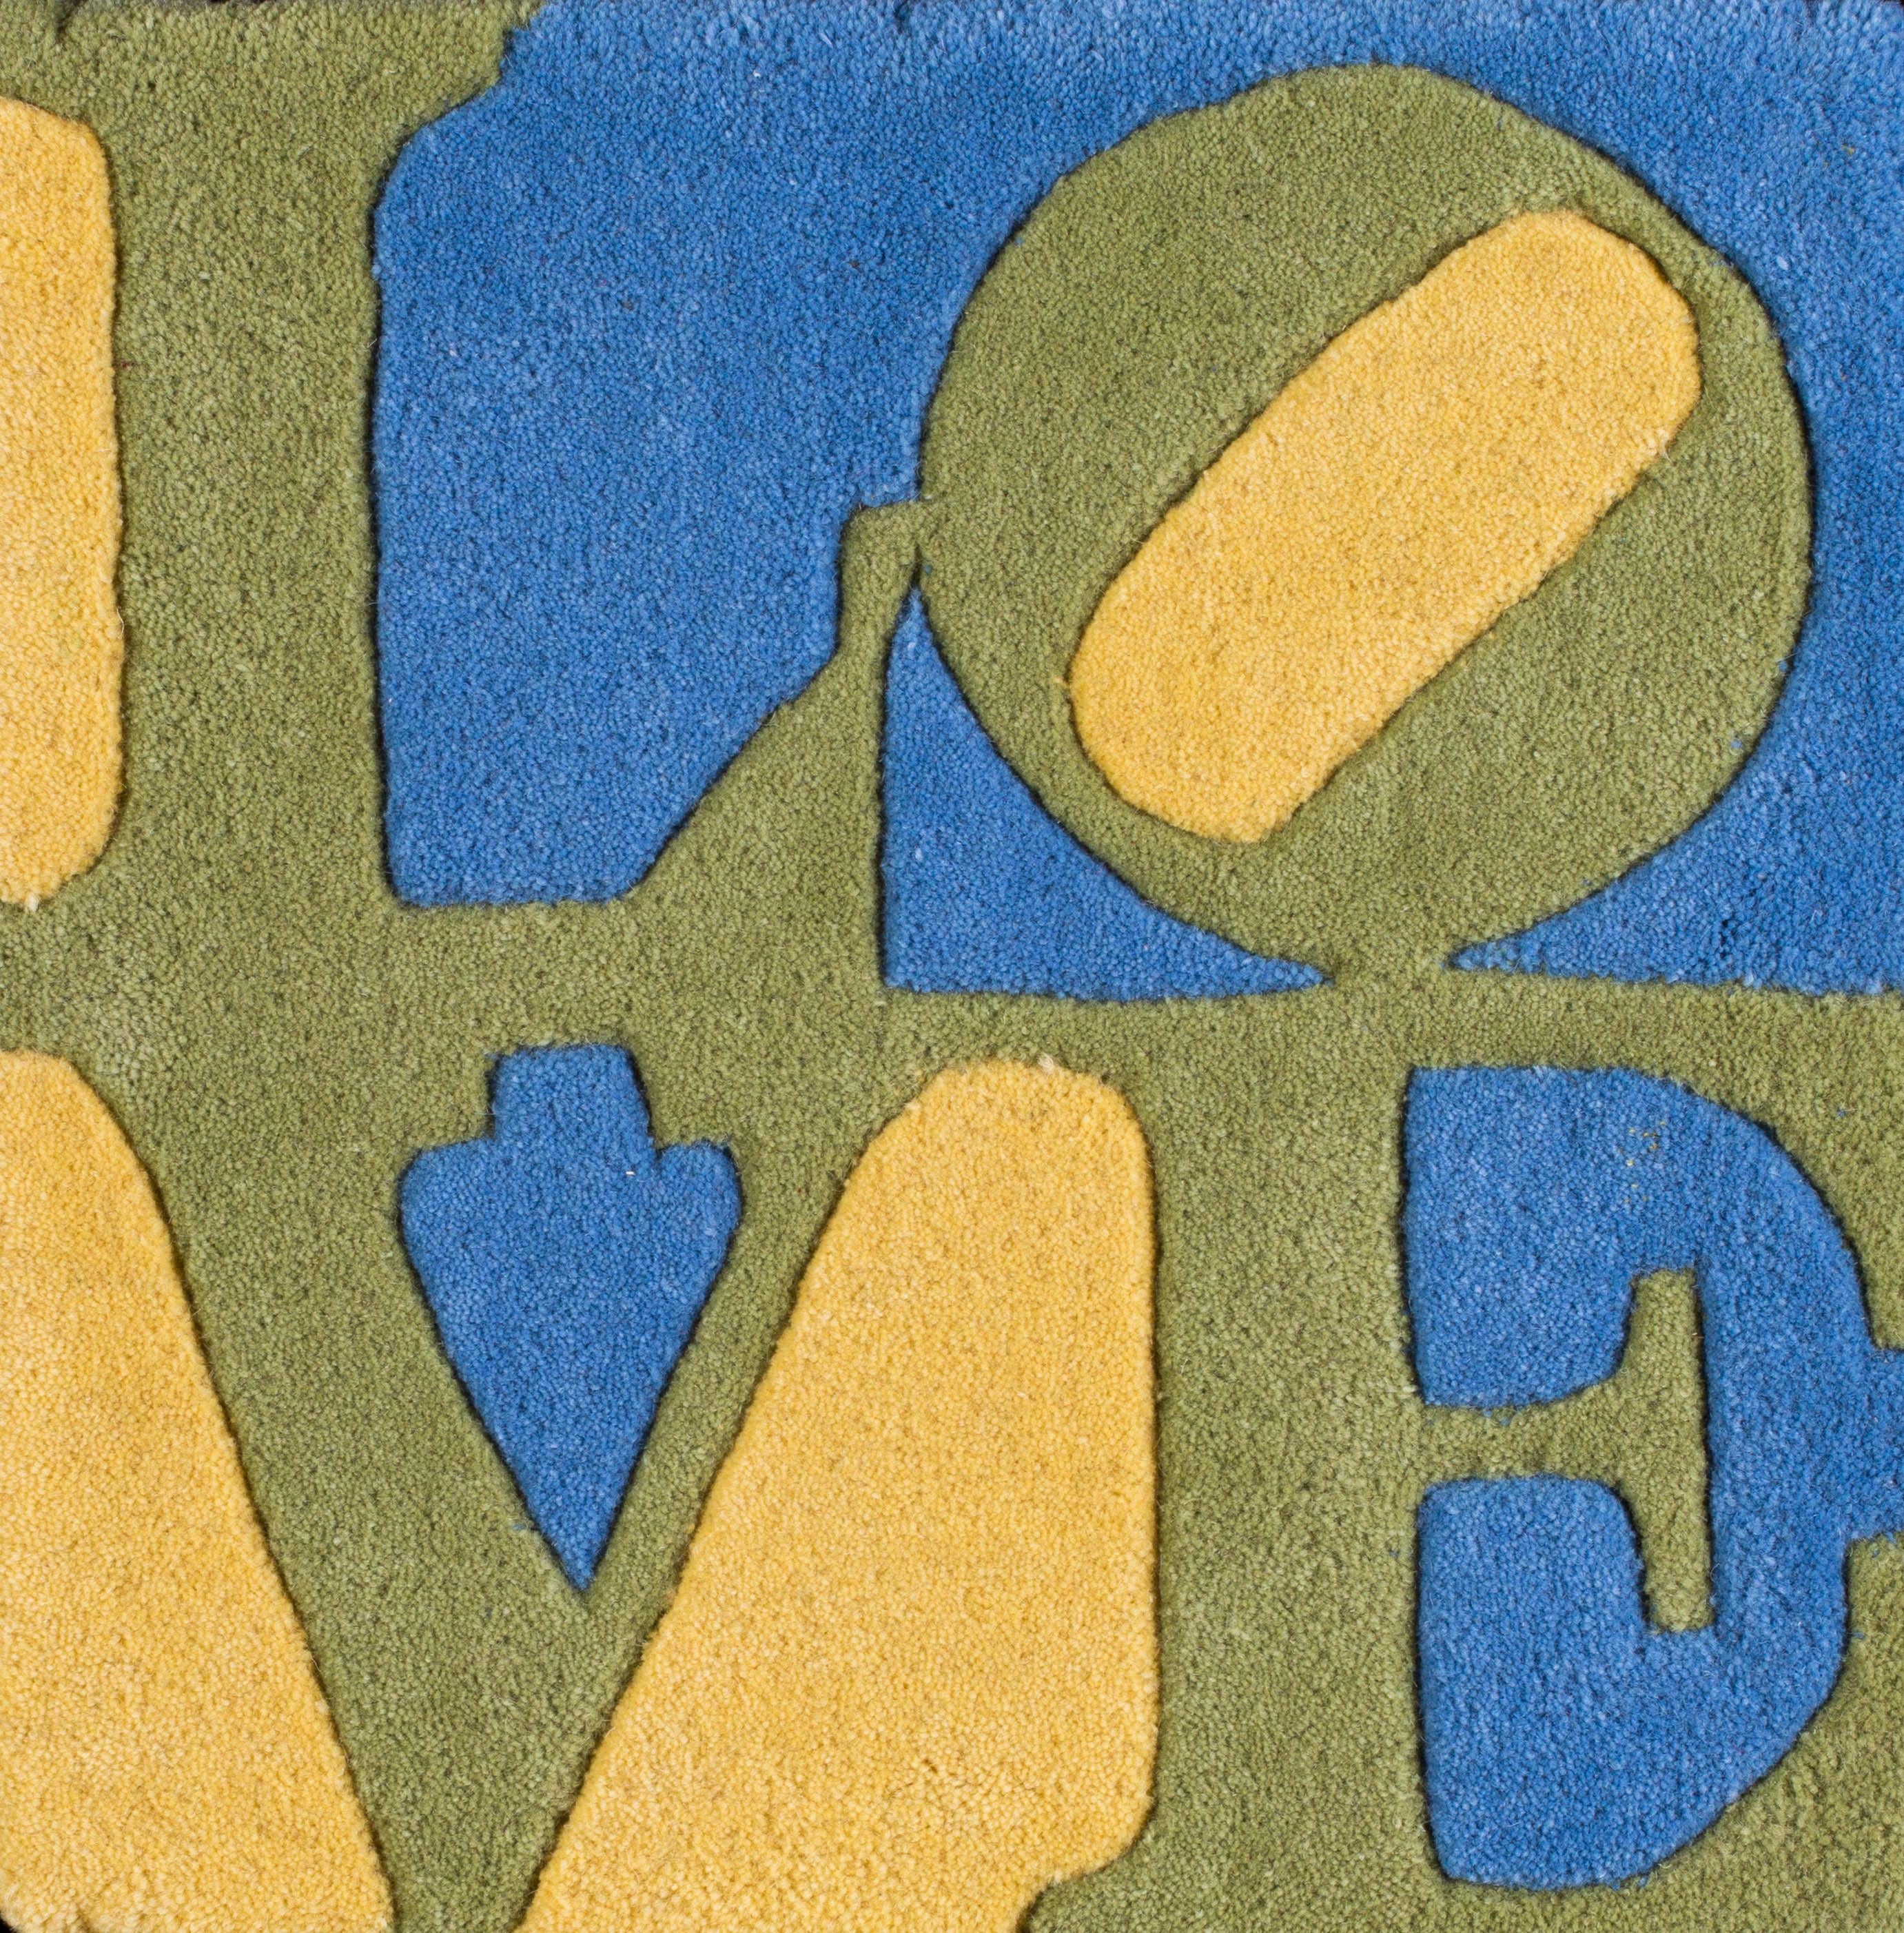 Spring, mixed media 'Love' popart piece in green, yellow and blue by Indiana - Pop Art Mixed Media Art by (After) Robert Indiana